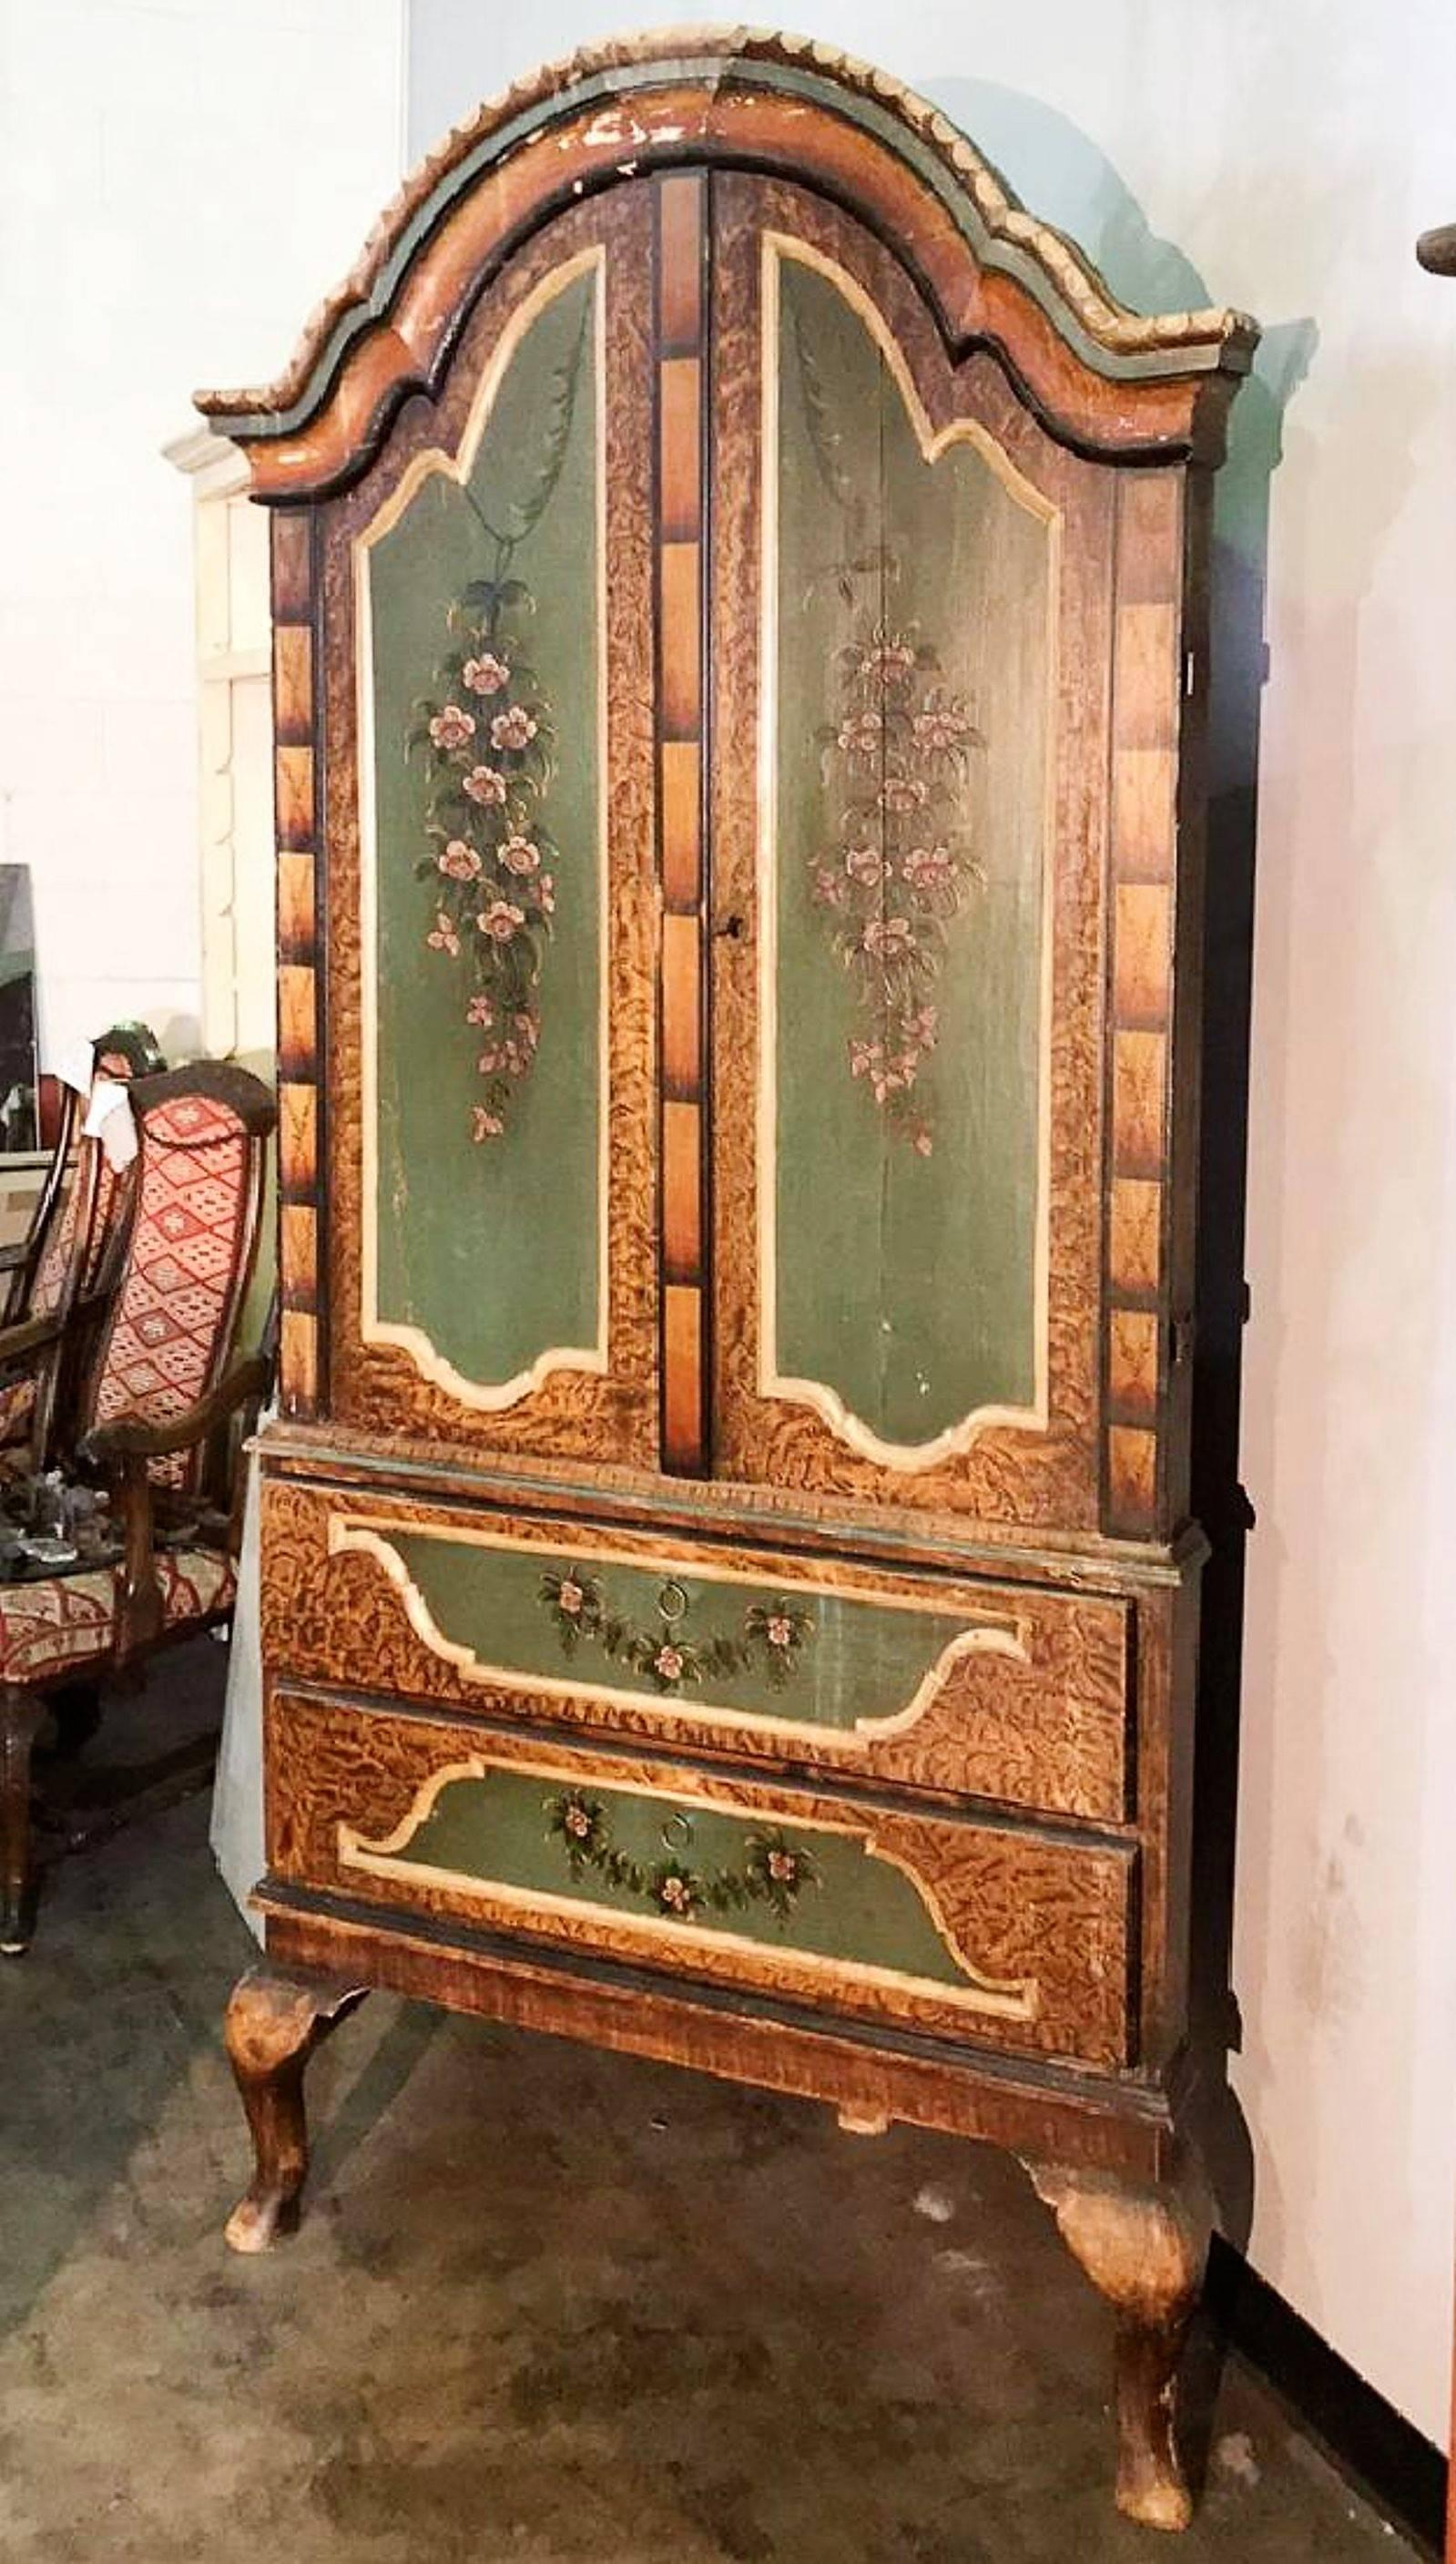 Hand-Carved 18th Century Swedish Carved and Painted Corner Cabinet, Rare